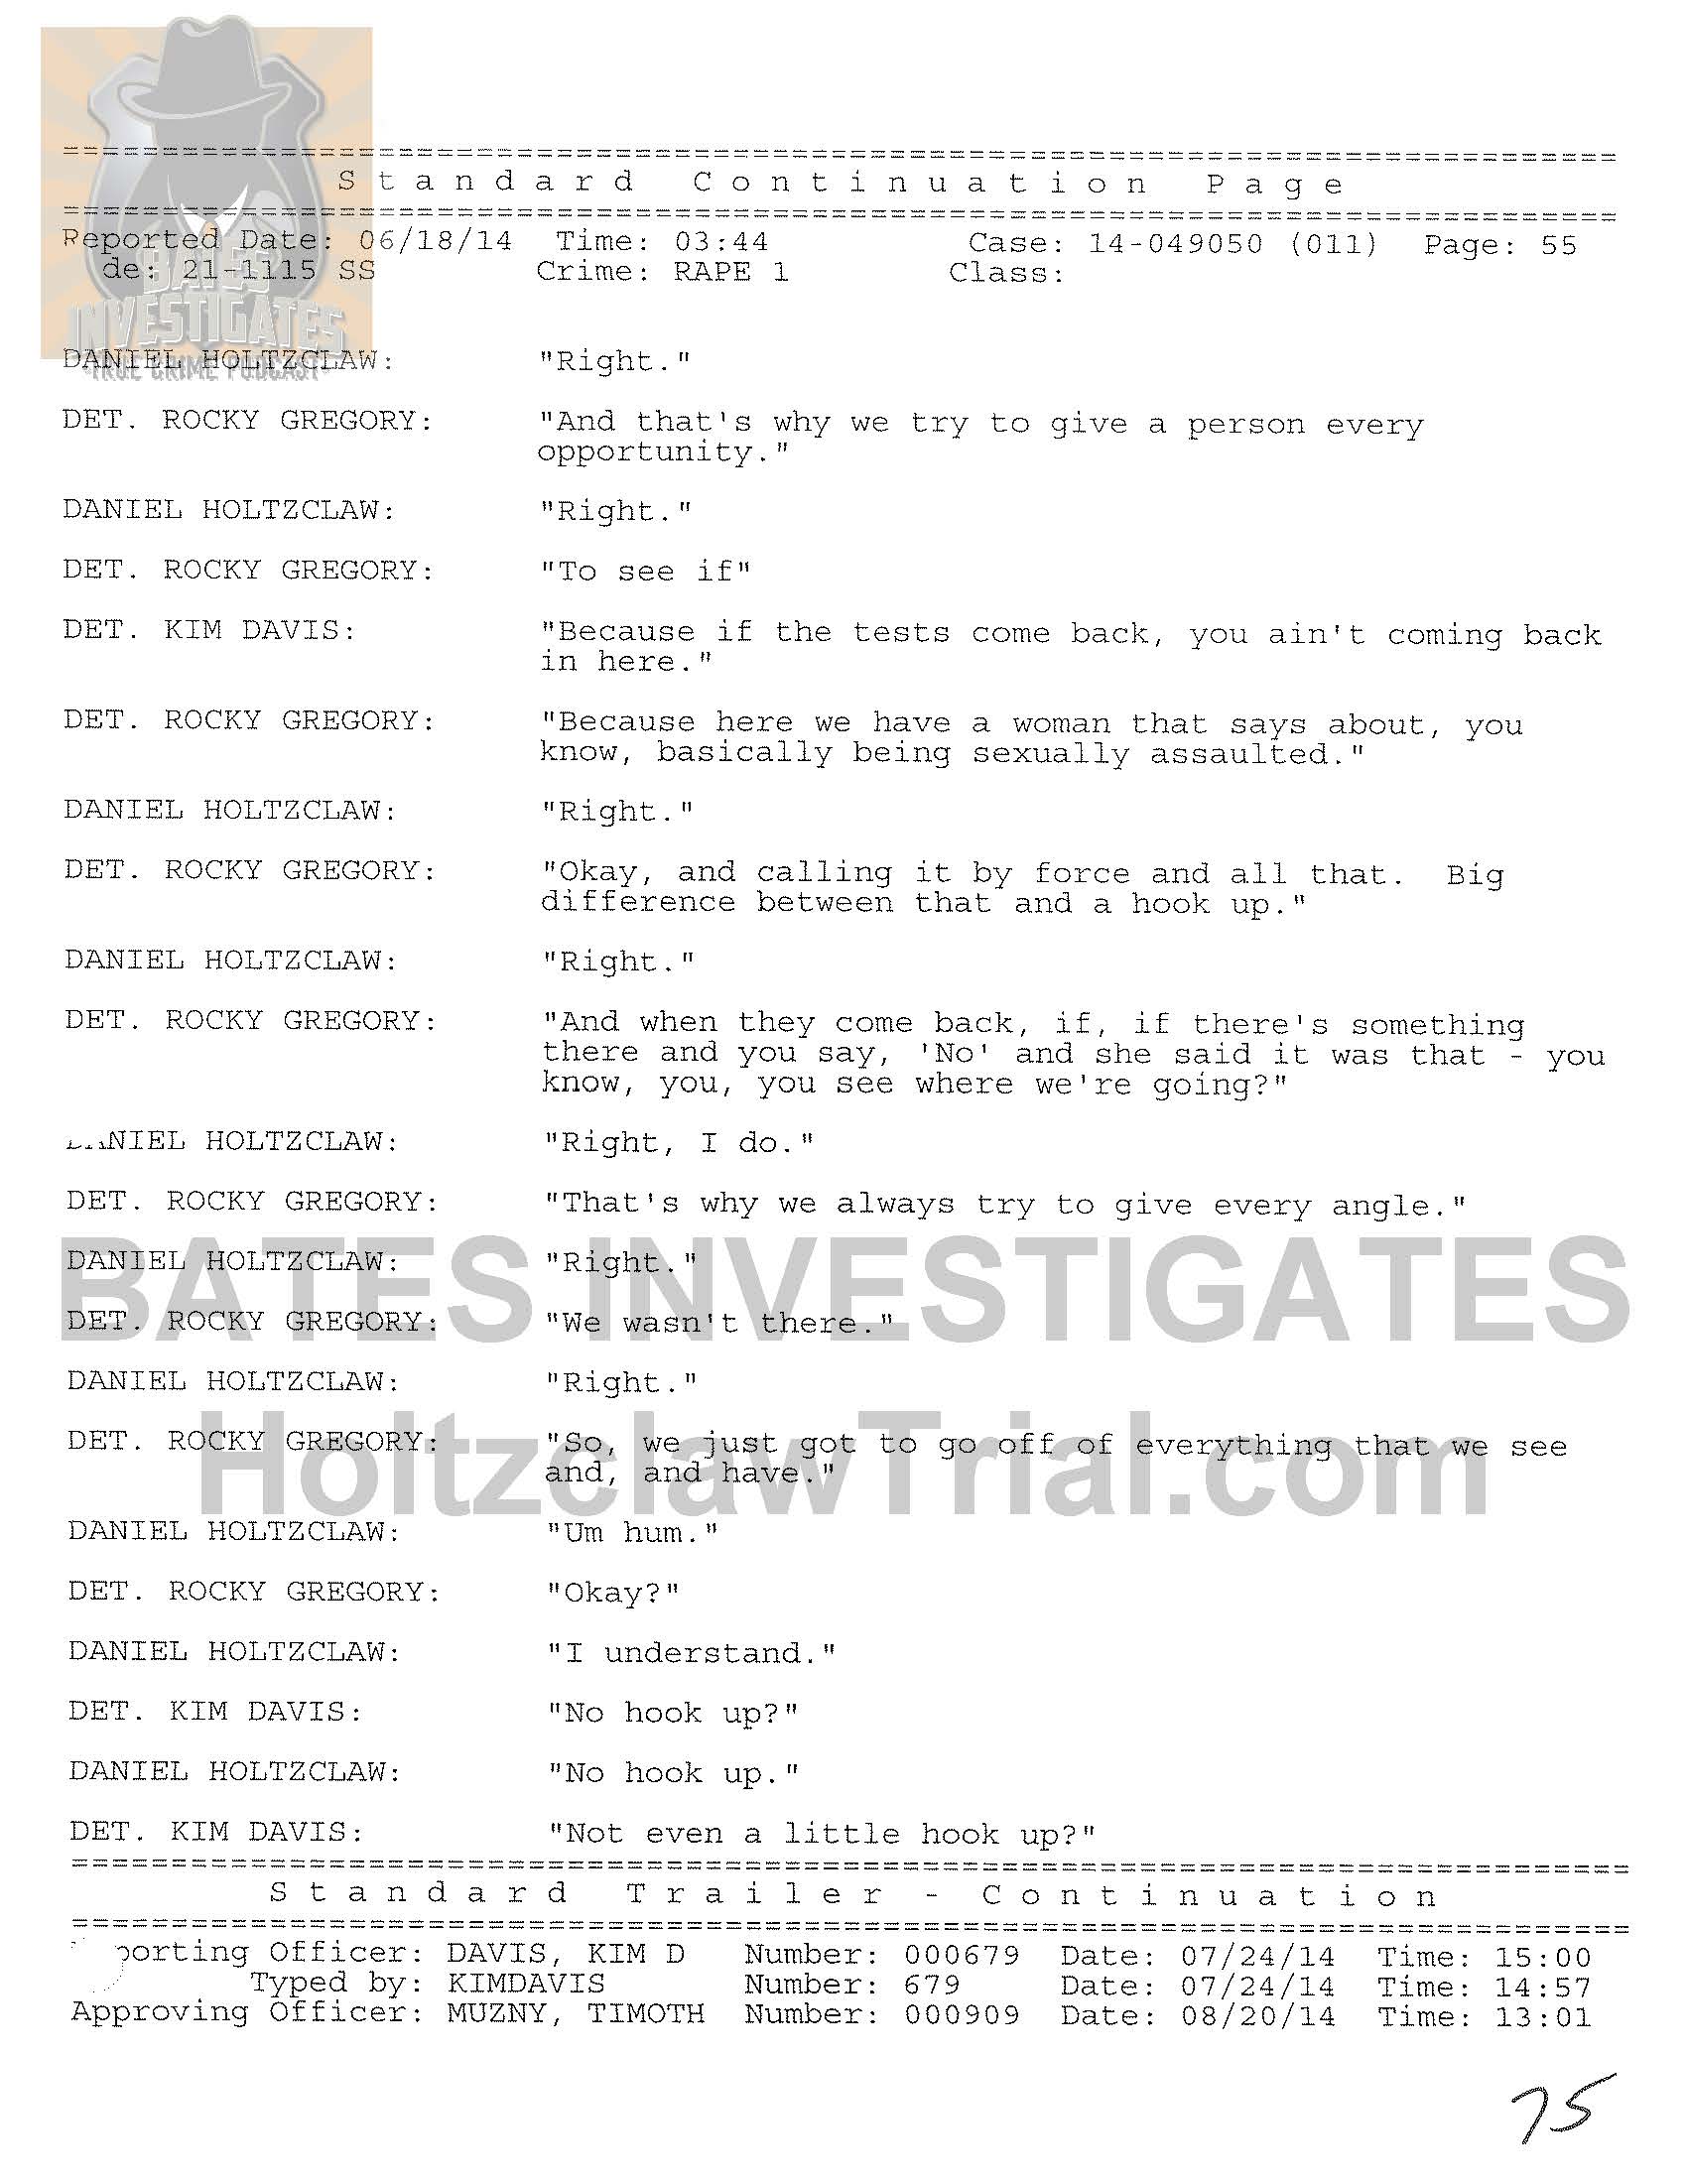 Holtzclaw Interrogation Transcript - Ep02 Redacted_Page_55.jpg